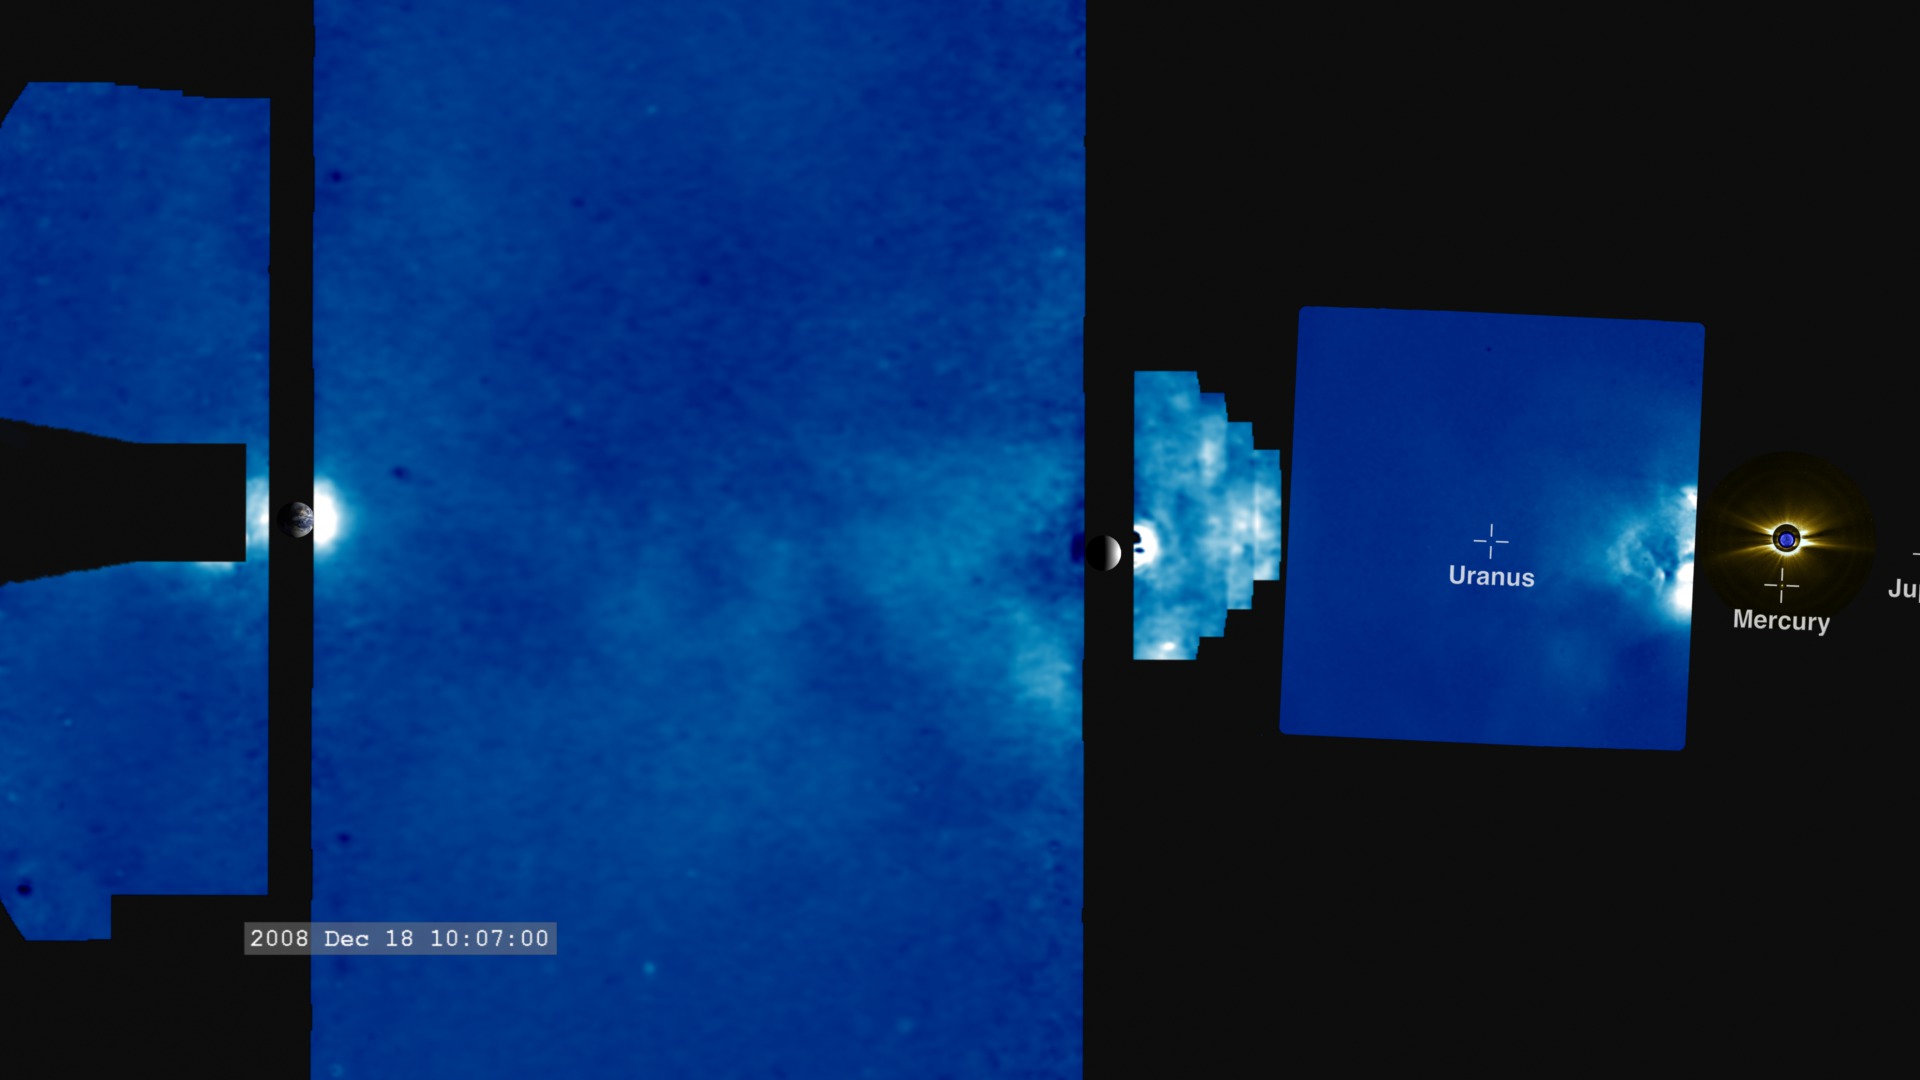 A view of the heliospheric region viewed from STEREO-A, using difference algorithms to enhance the visibility of the CME.